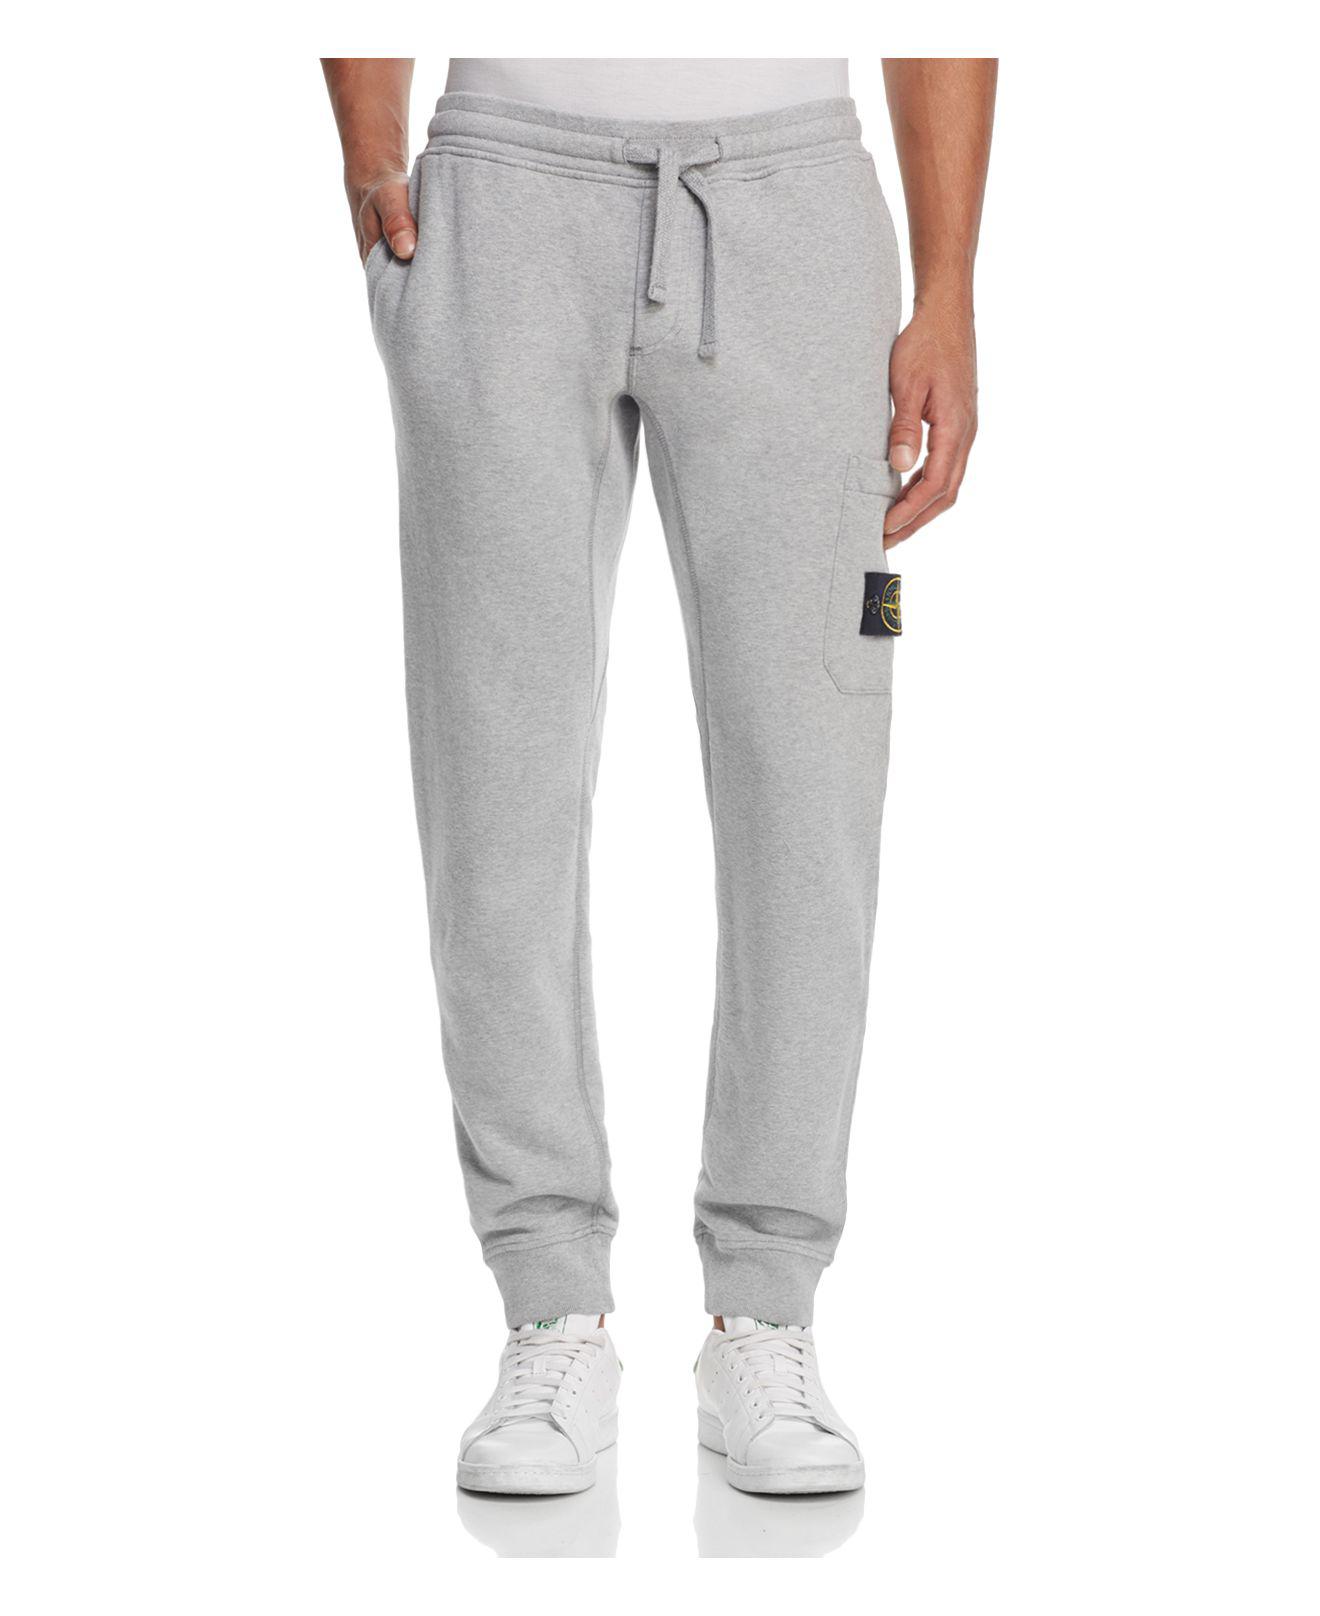 Stone Island Slim Fit Jogger Pants in Grey for Men - Lyst